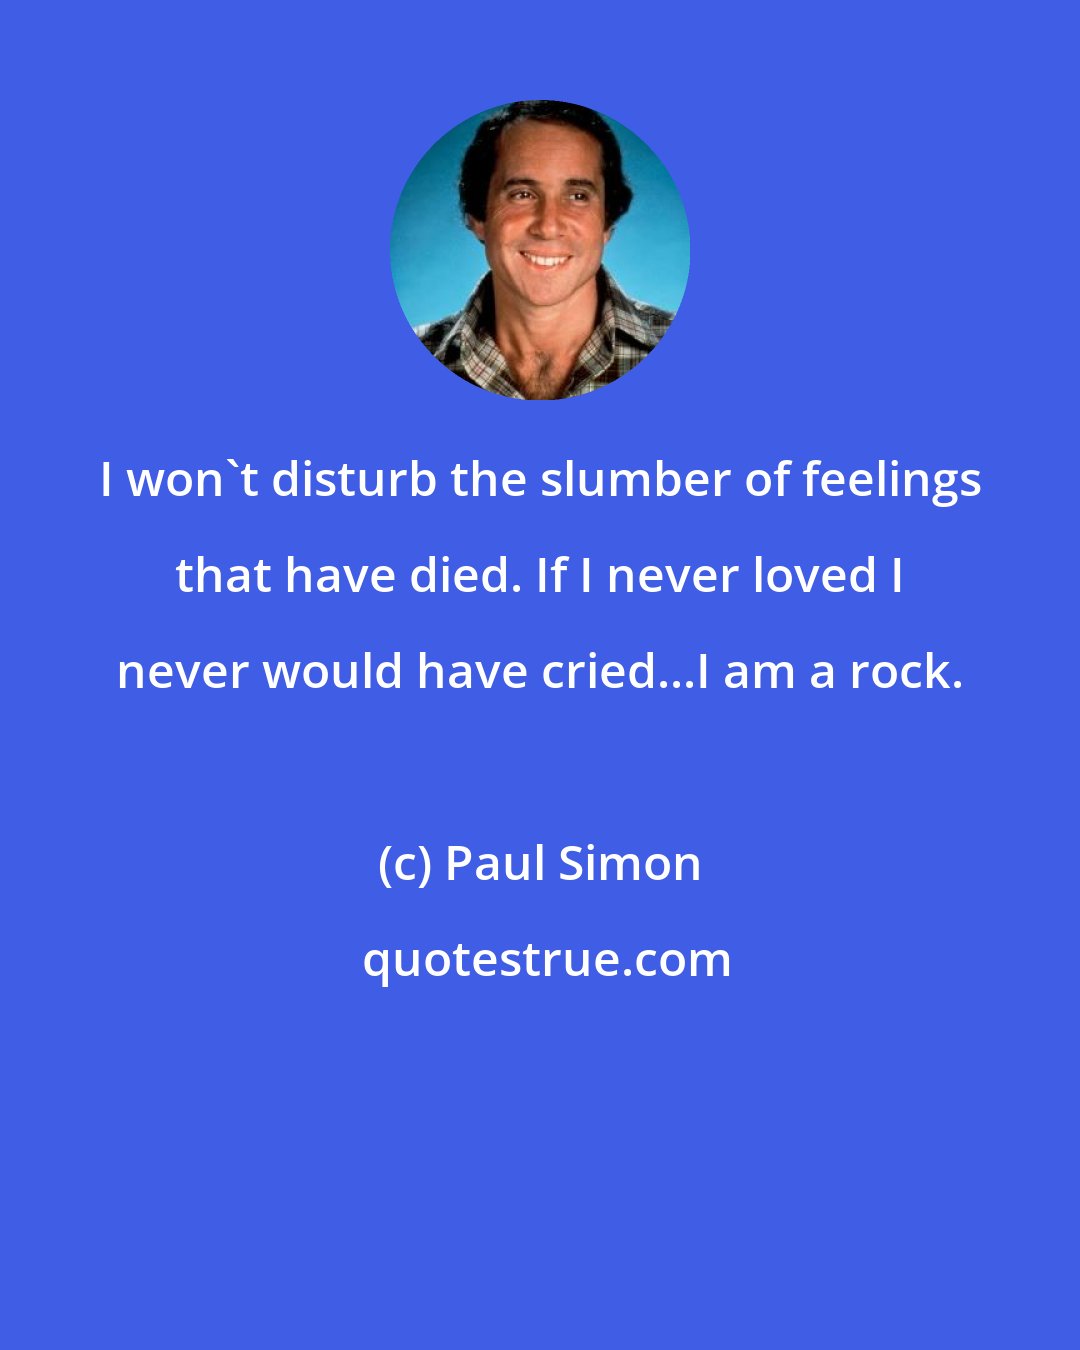 Paul Simon: I won't disturb the slumber of feelings that have died. If I never loved I never would have cried...I am a rock.